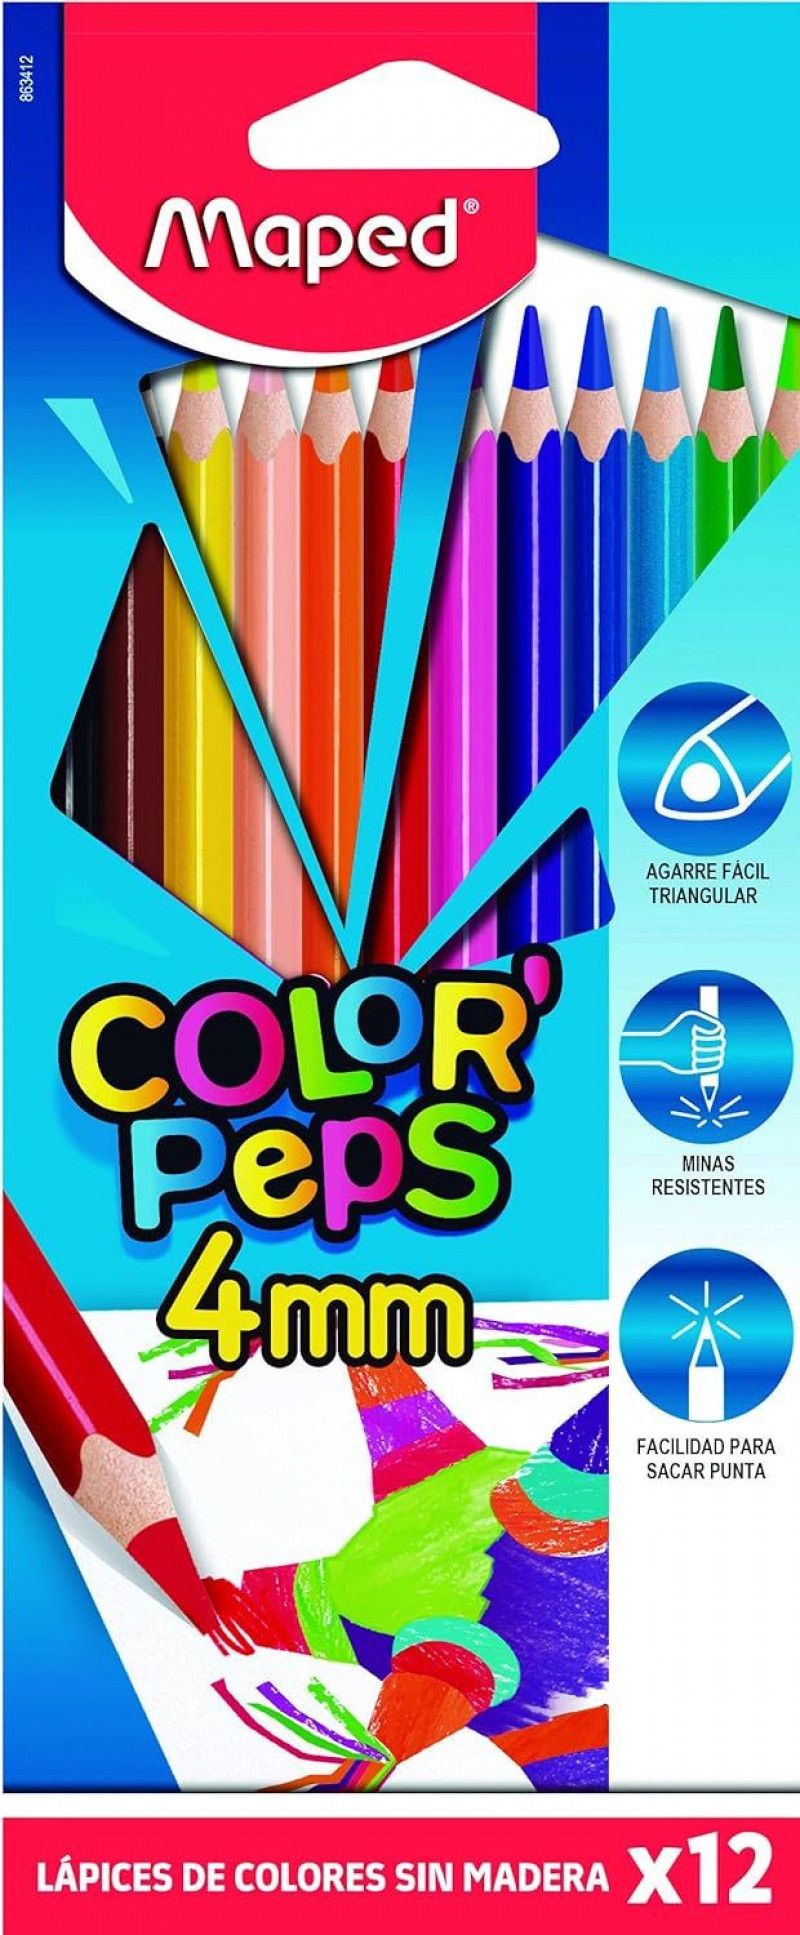 LAPIS 12 CORES COLORPEPS 4MM MAPED - REF. 863412 - 1 UNIDADE